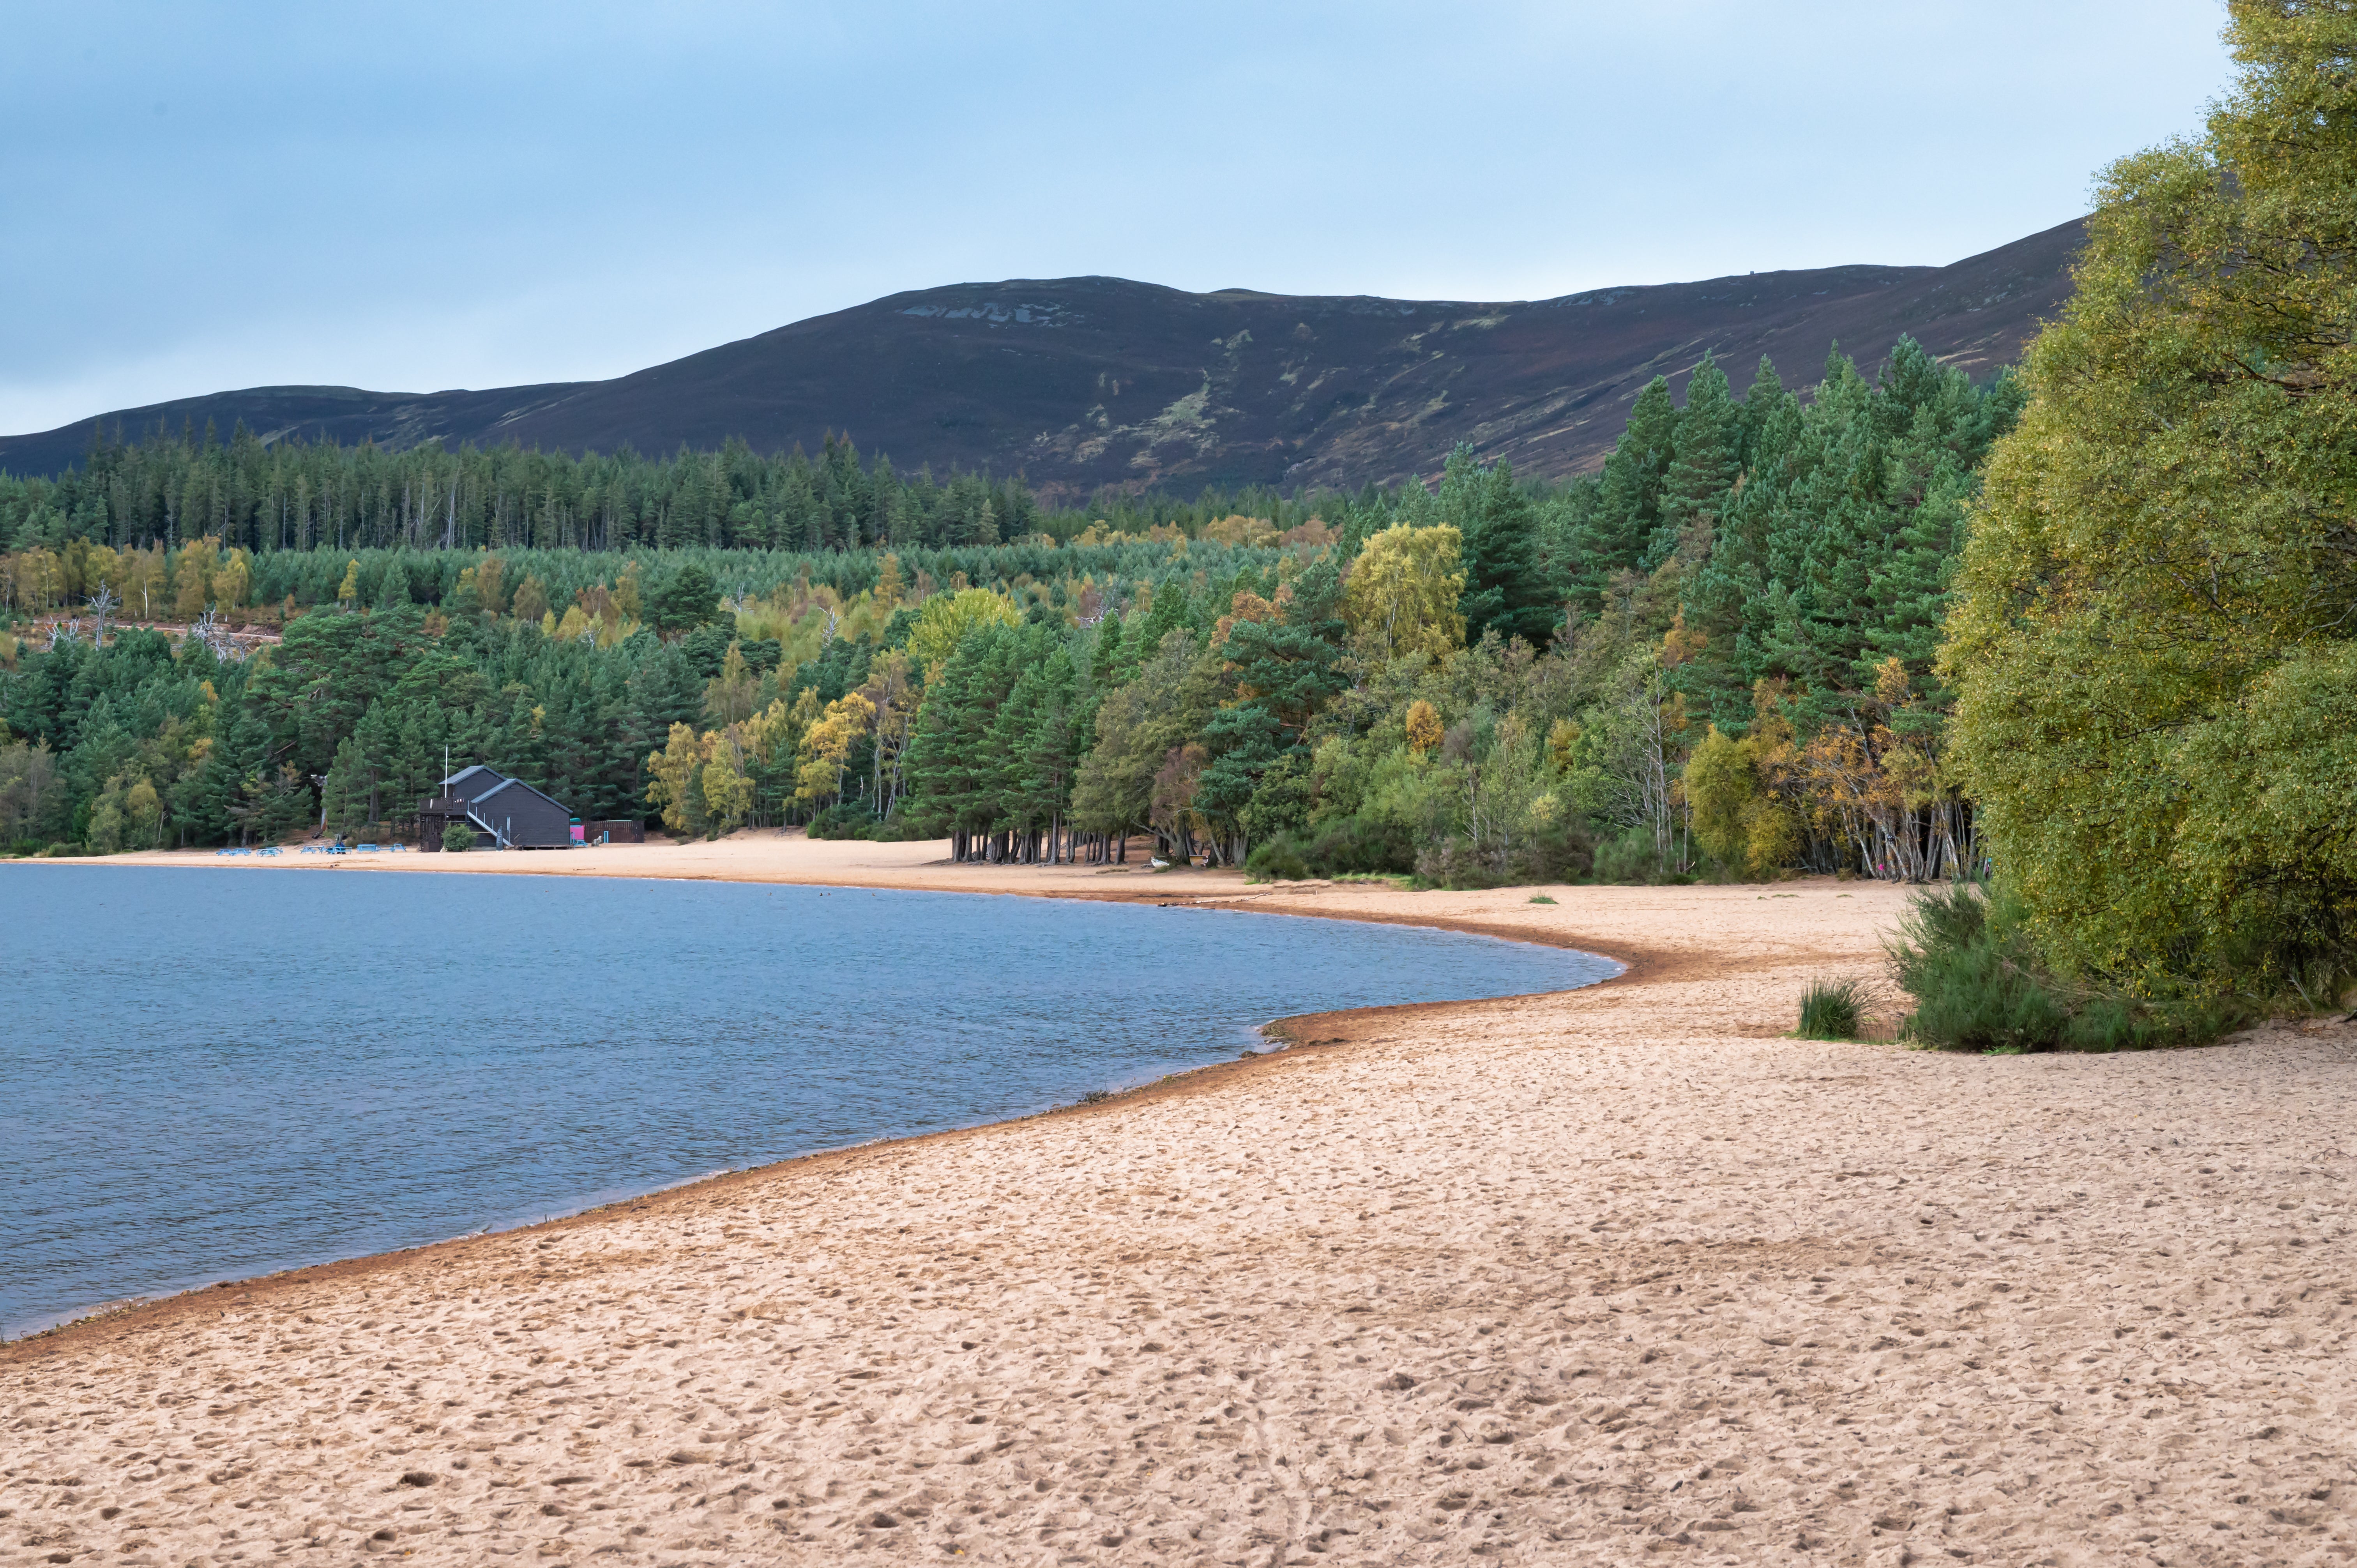 Loch Morlich is Scotland’s only award-winning freshwater beach, and the highest beach in the UK